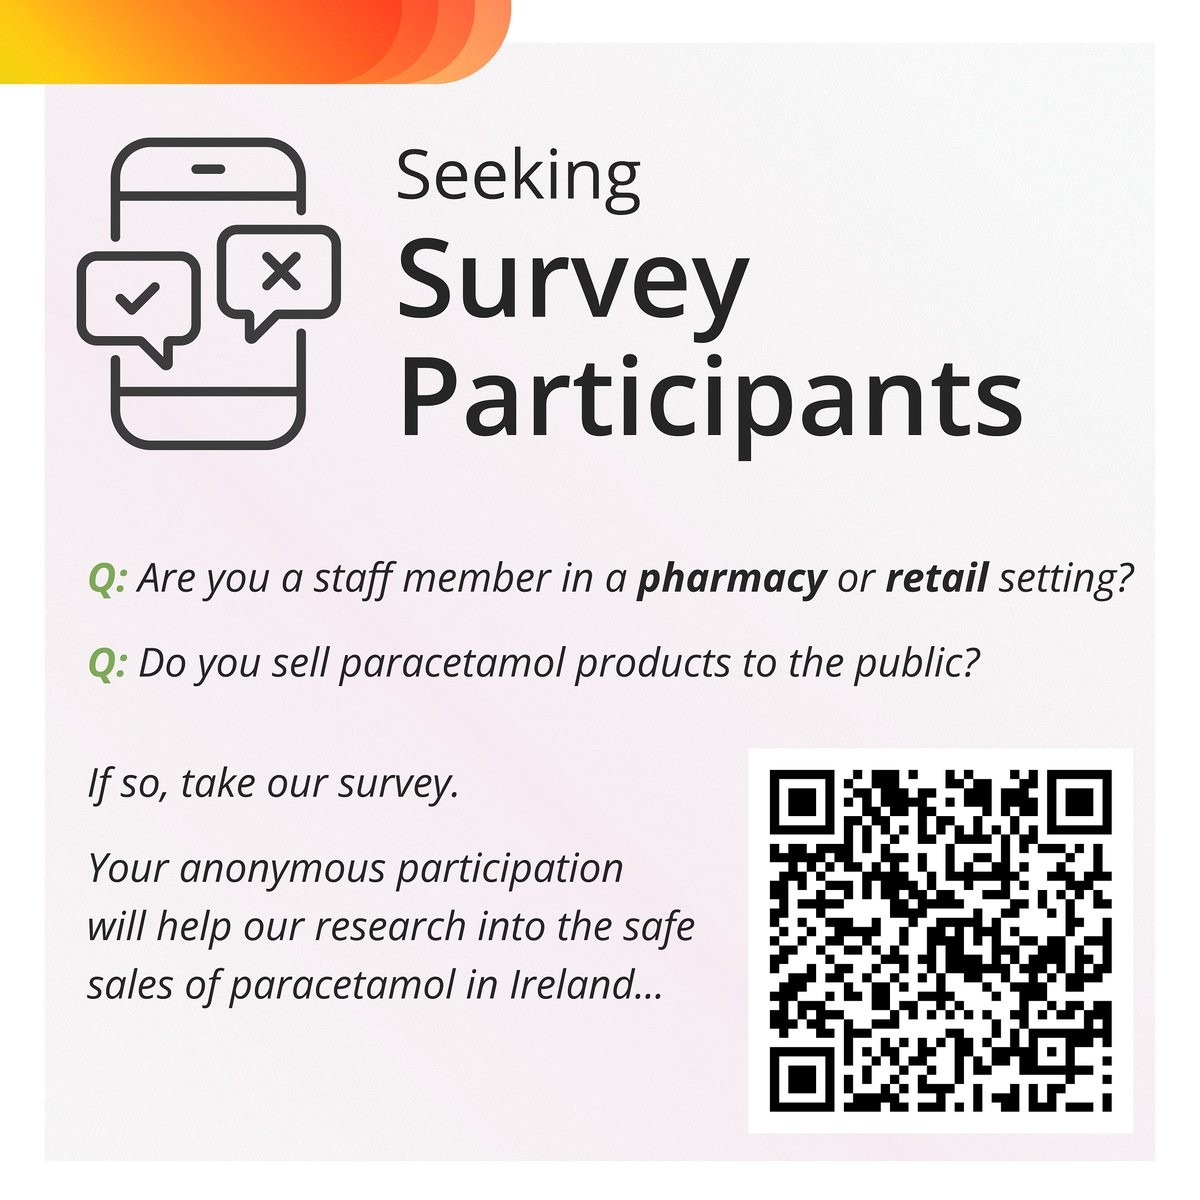 💊 The Paracetamol working group led by the DoH and with key stakeholder representation, is currently working to improve awareness of and adherence to paracetamol sales guidelines in pharmacy and retail settings. Please complete the anonymous survey ➡️ bit.ly/3w4ySZY